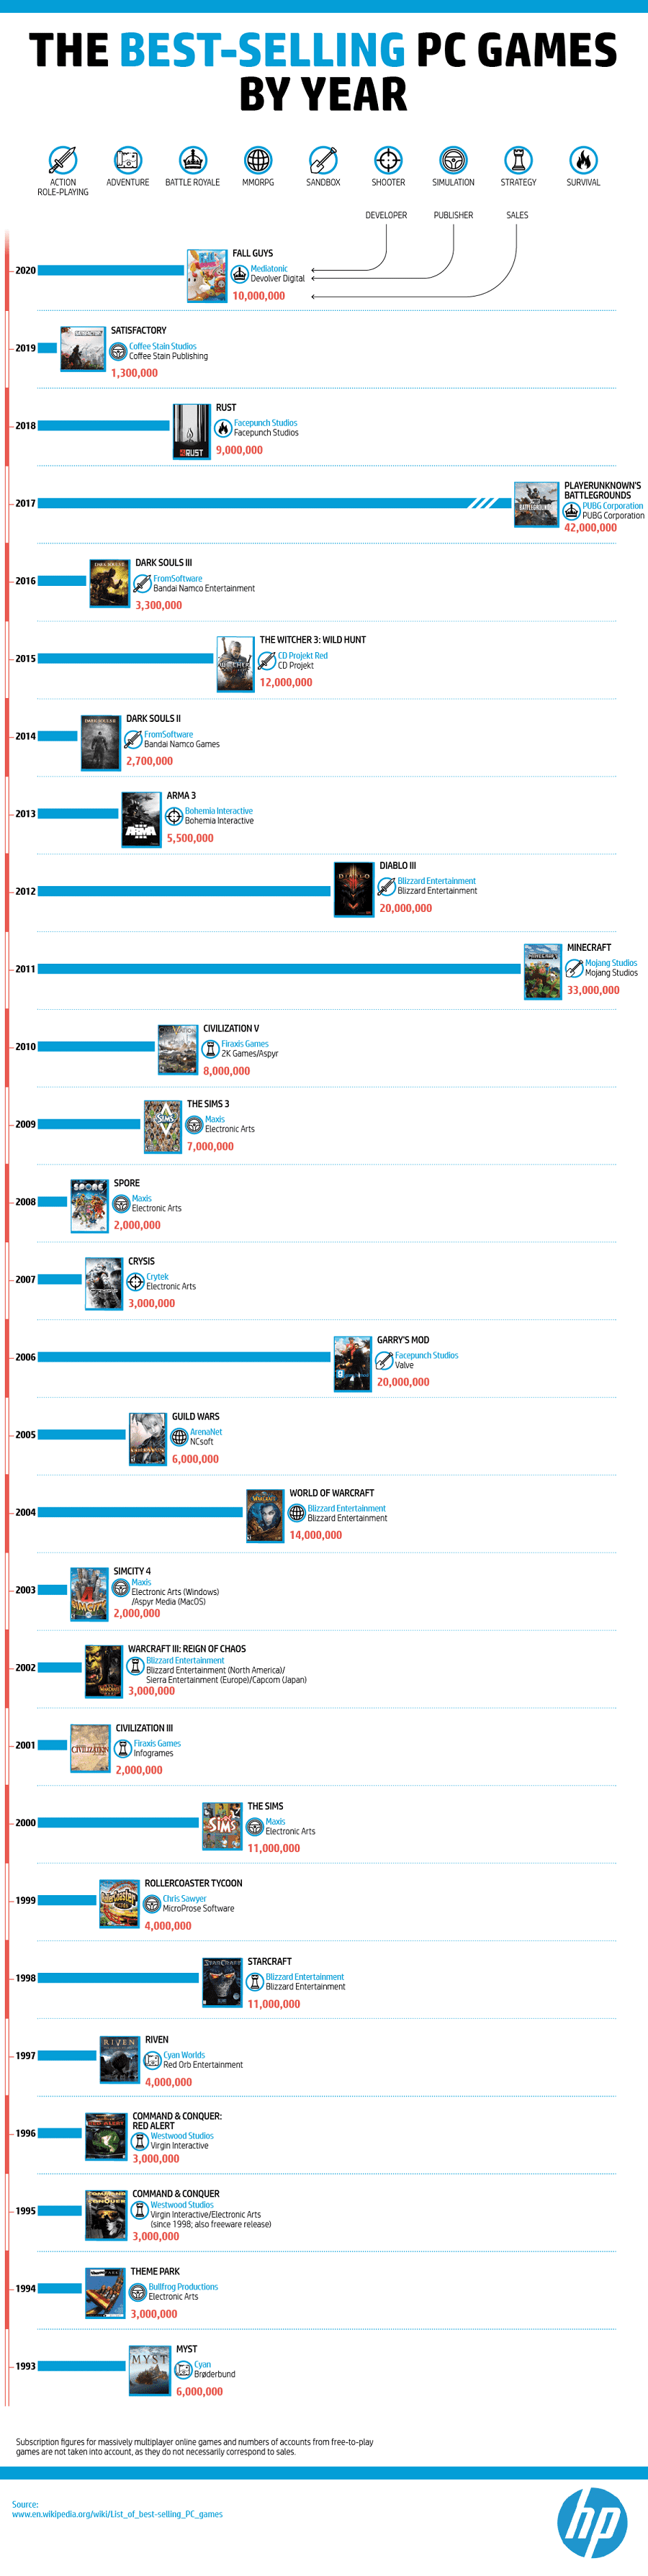 best-selling-pc-games-by-year-Infographic